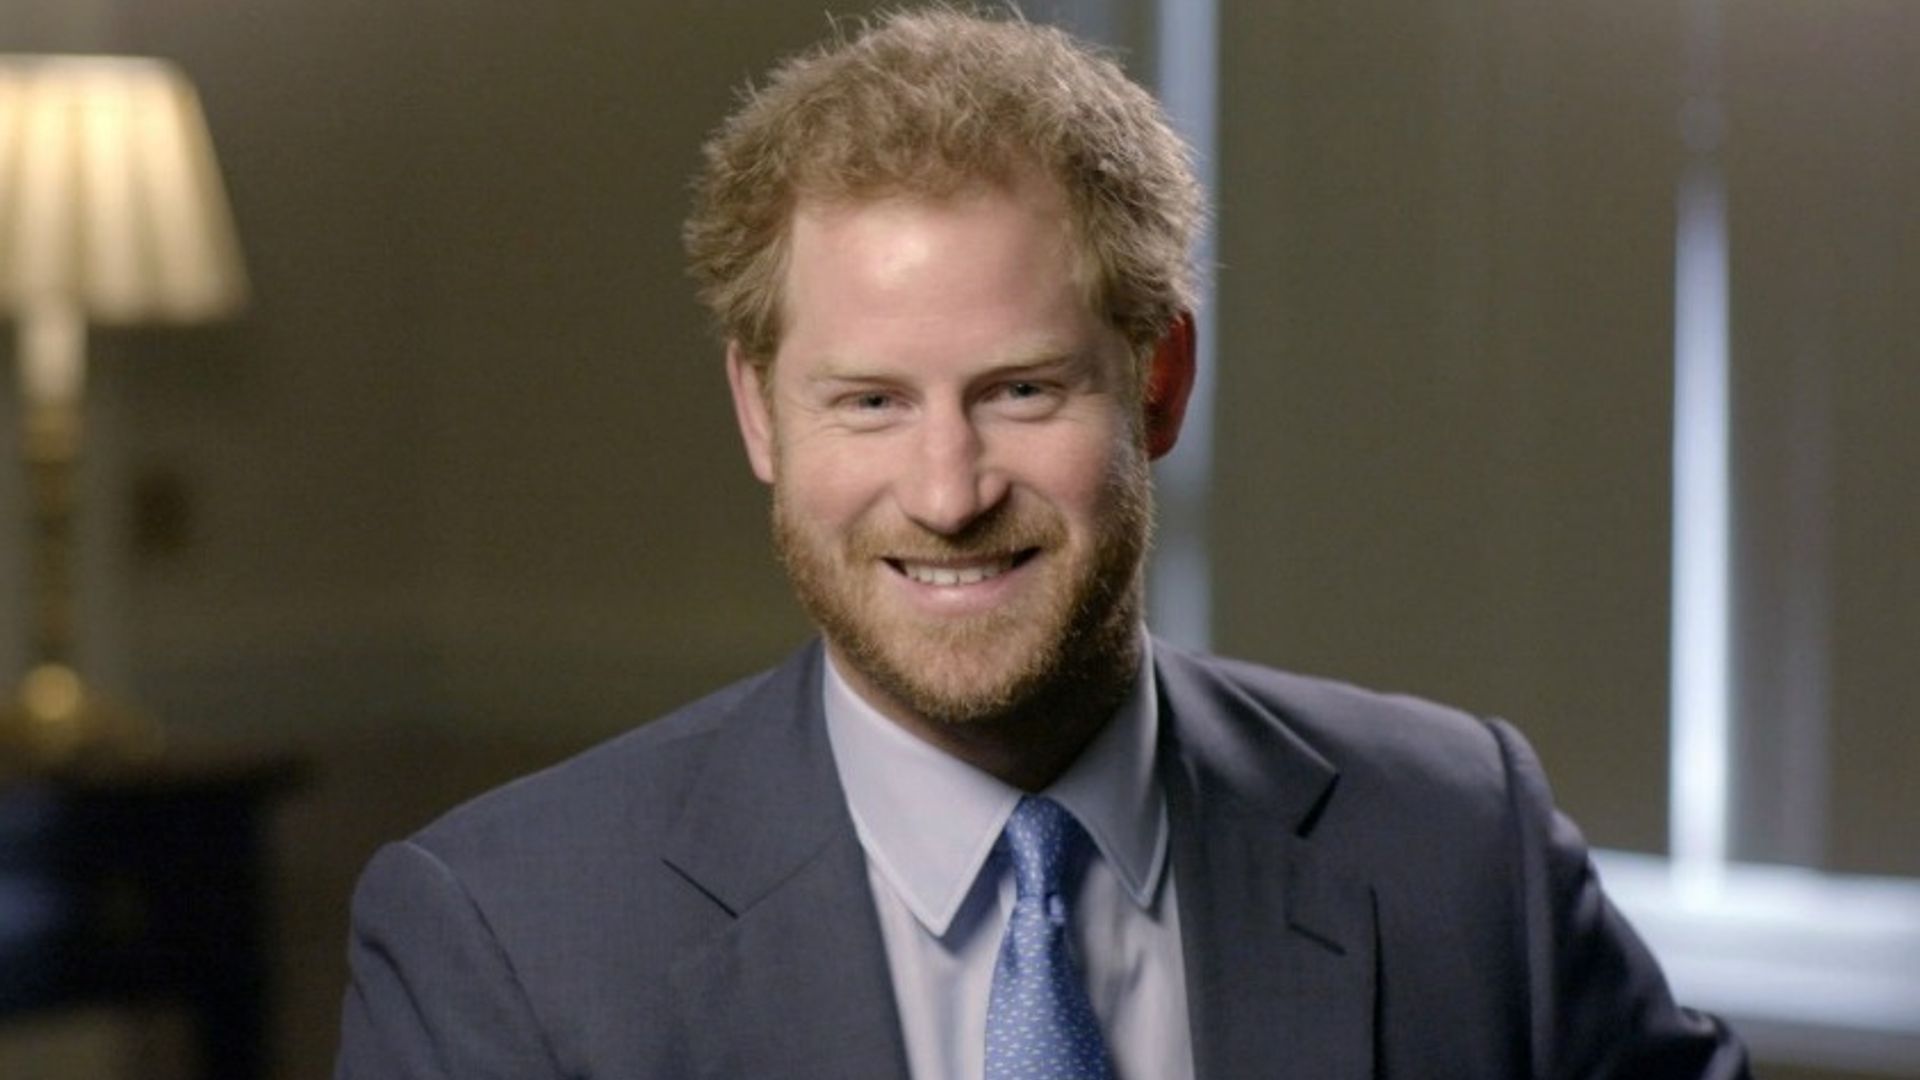 Prince Harry on his relationship with Queen Elizabeth: 'I always view her as my boss'